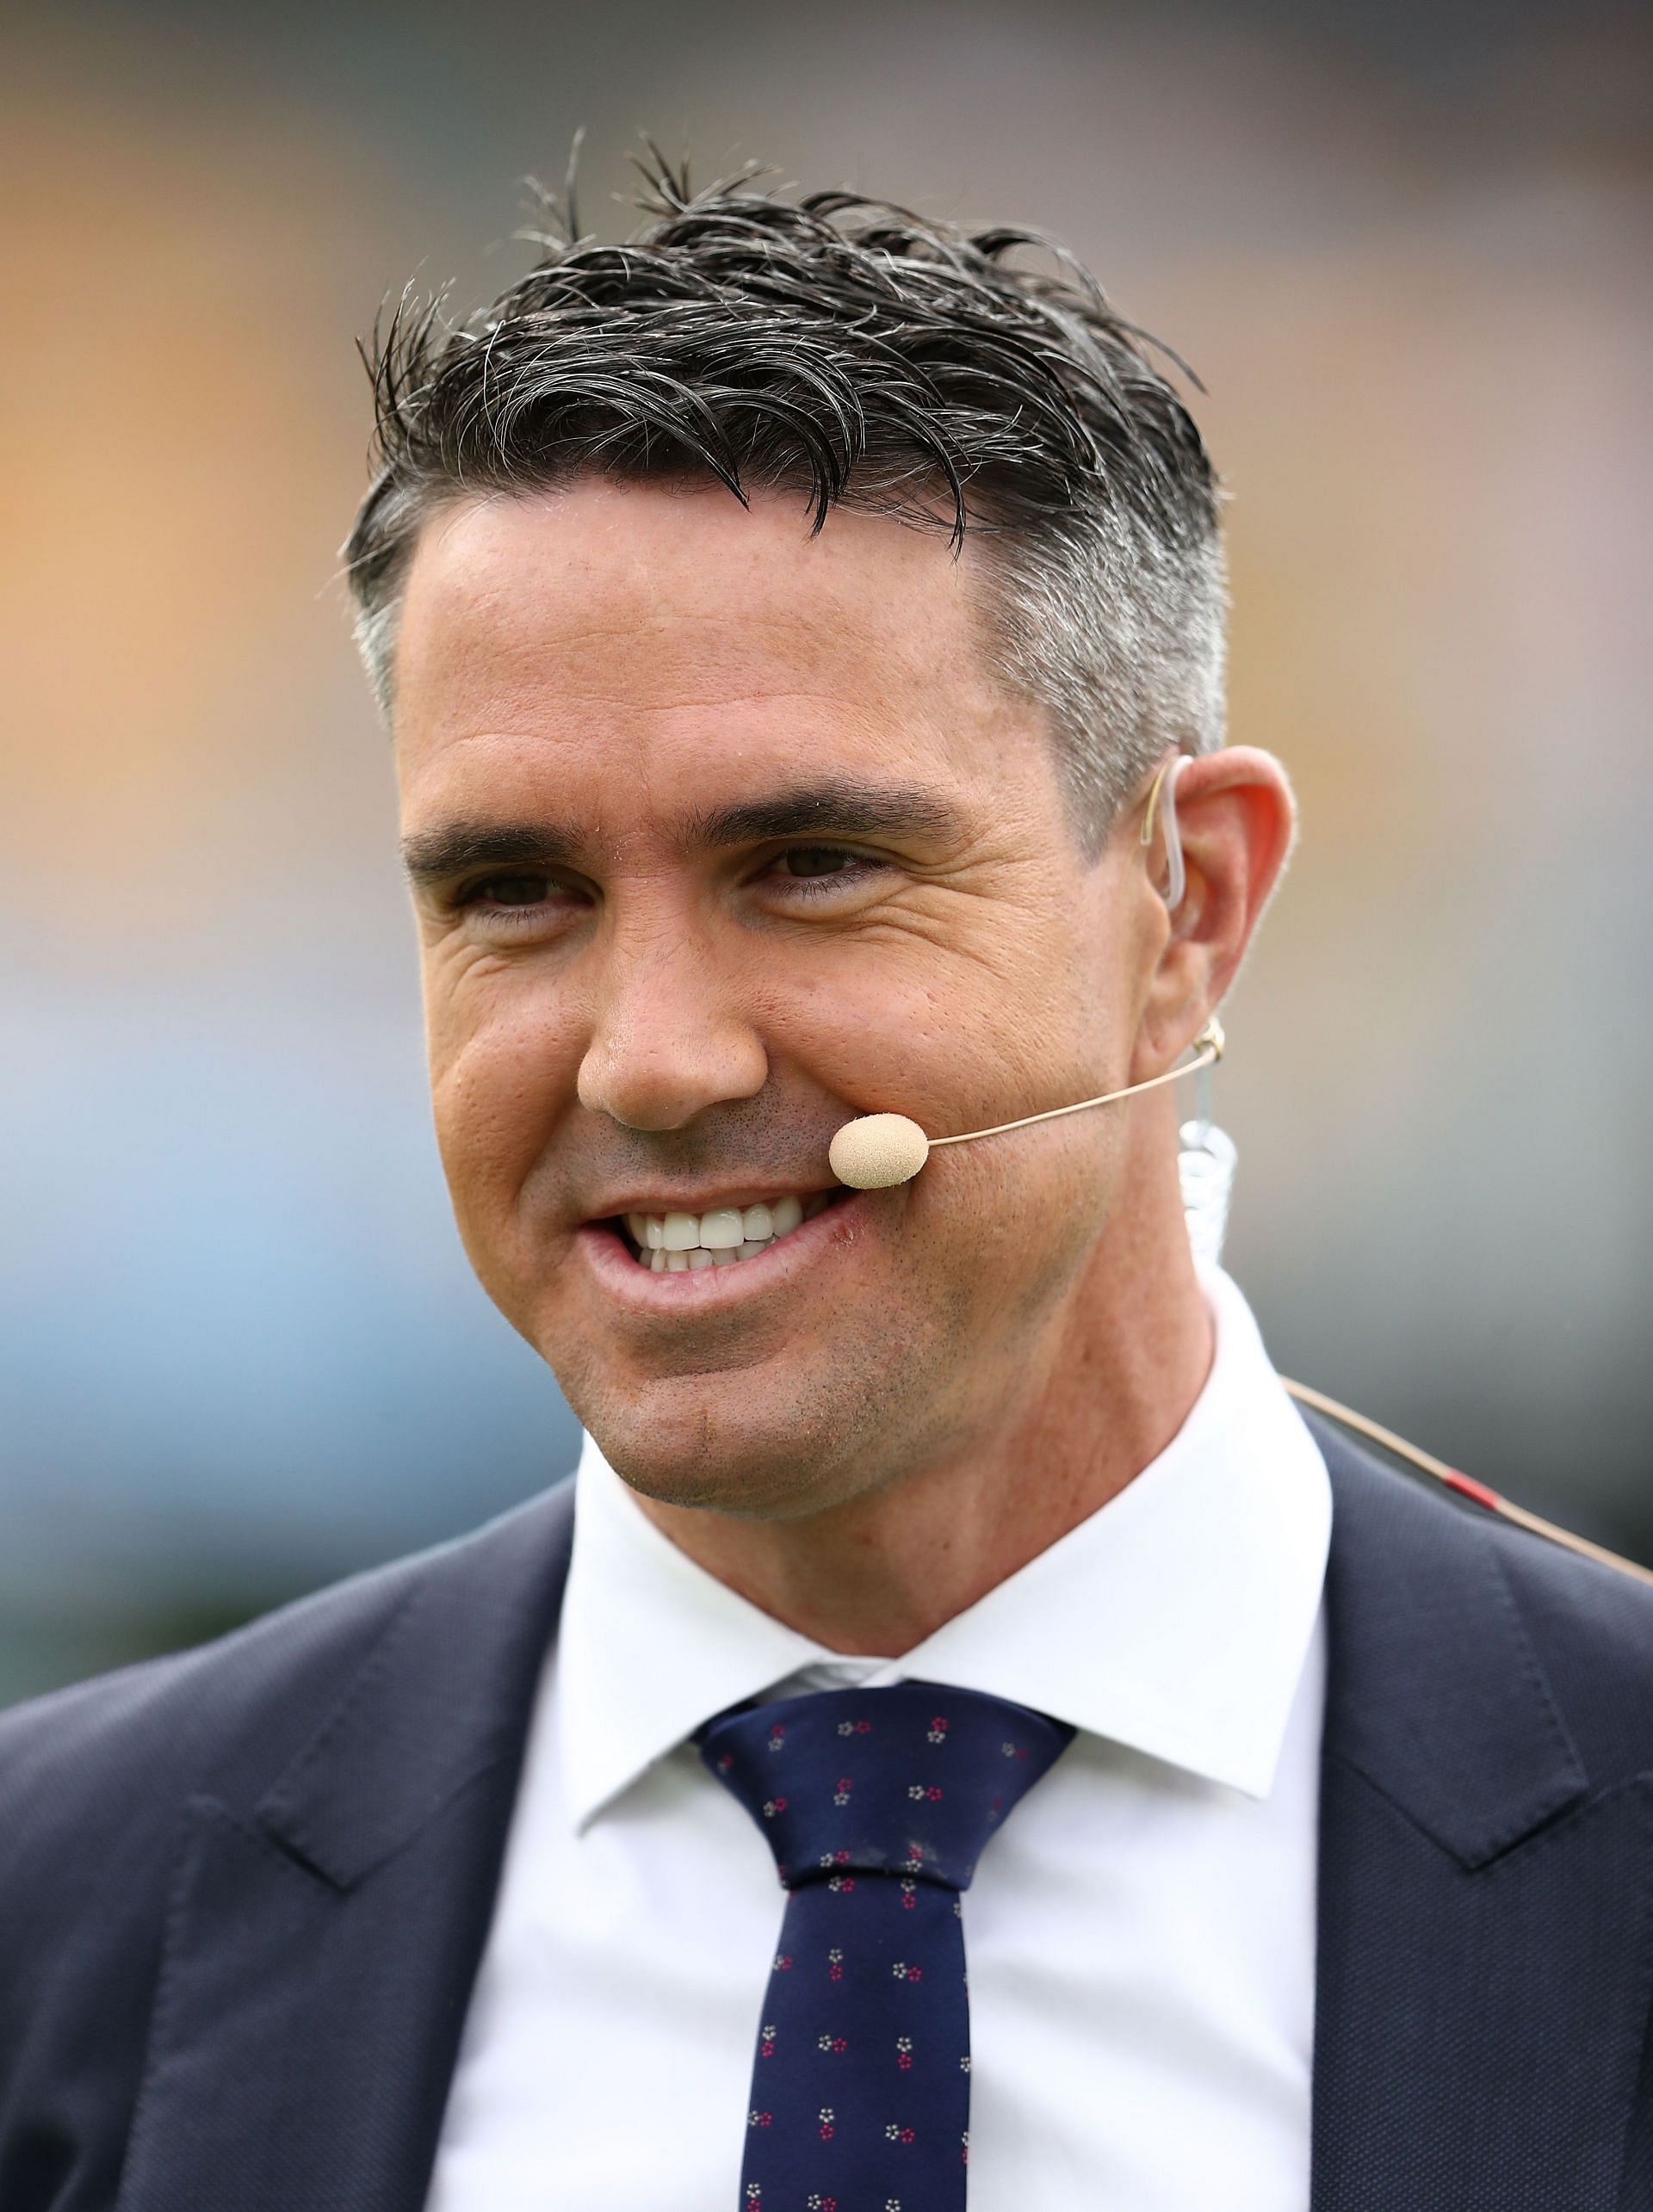 Kevin Pietersen recently penned his love for India on social media (Credit: Getty Images)